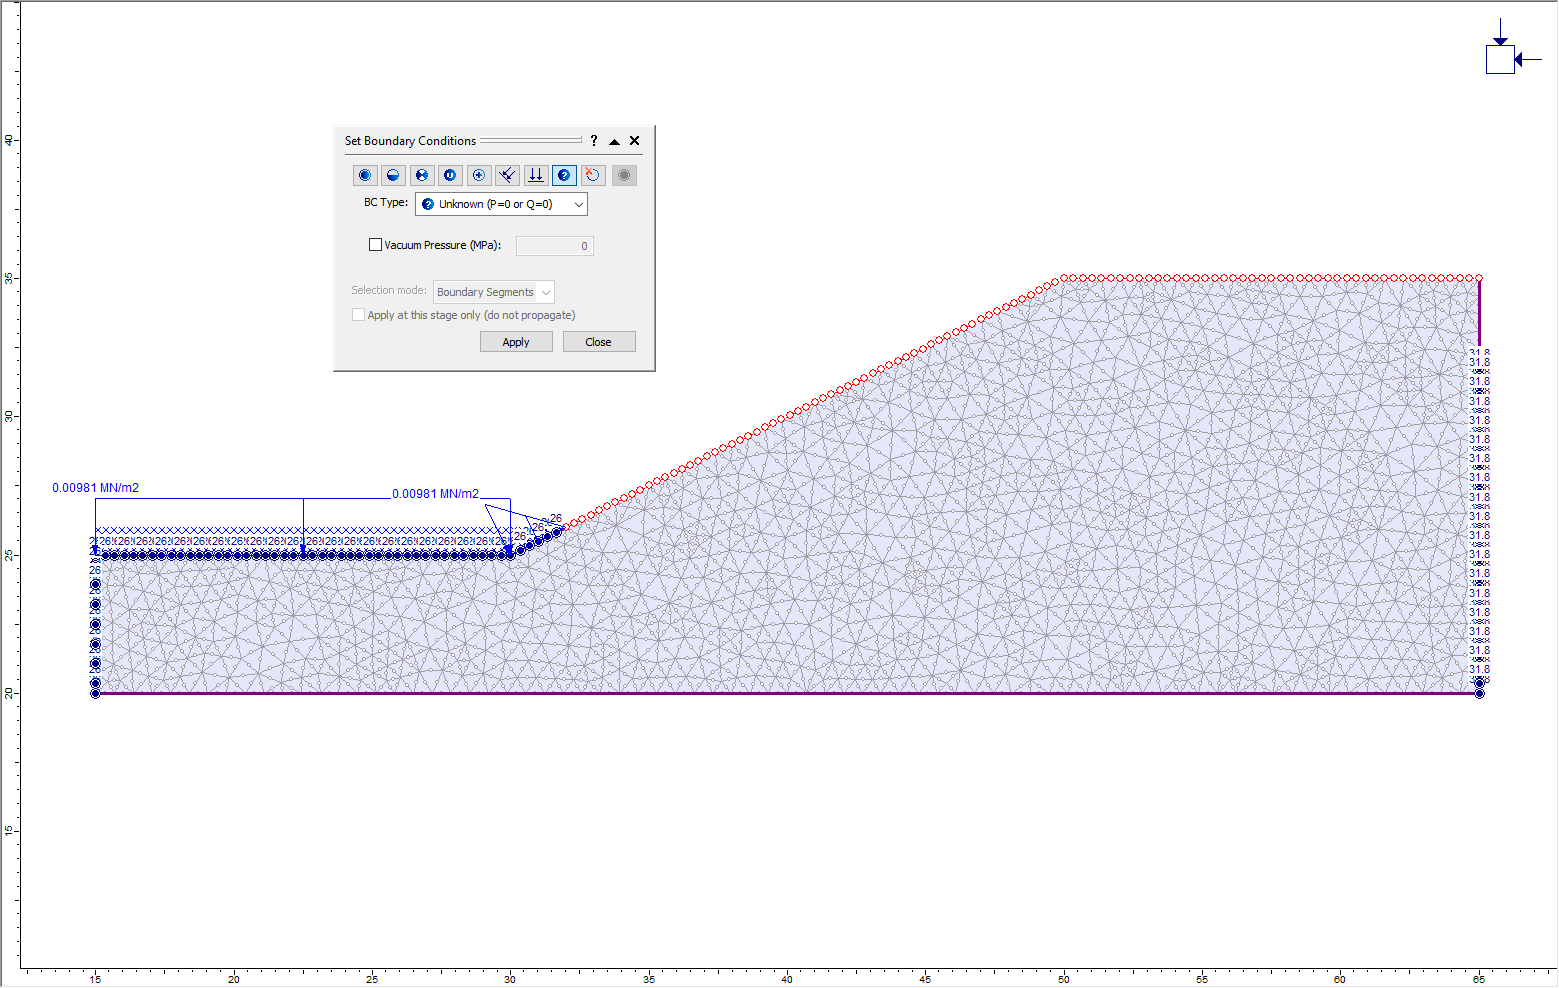 Image of model when selecting the upper two segments of the slope 